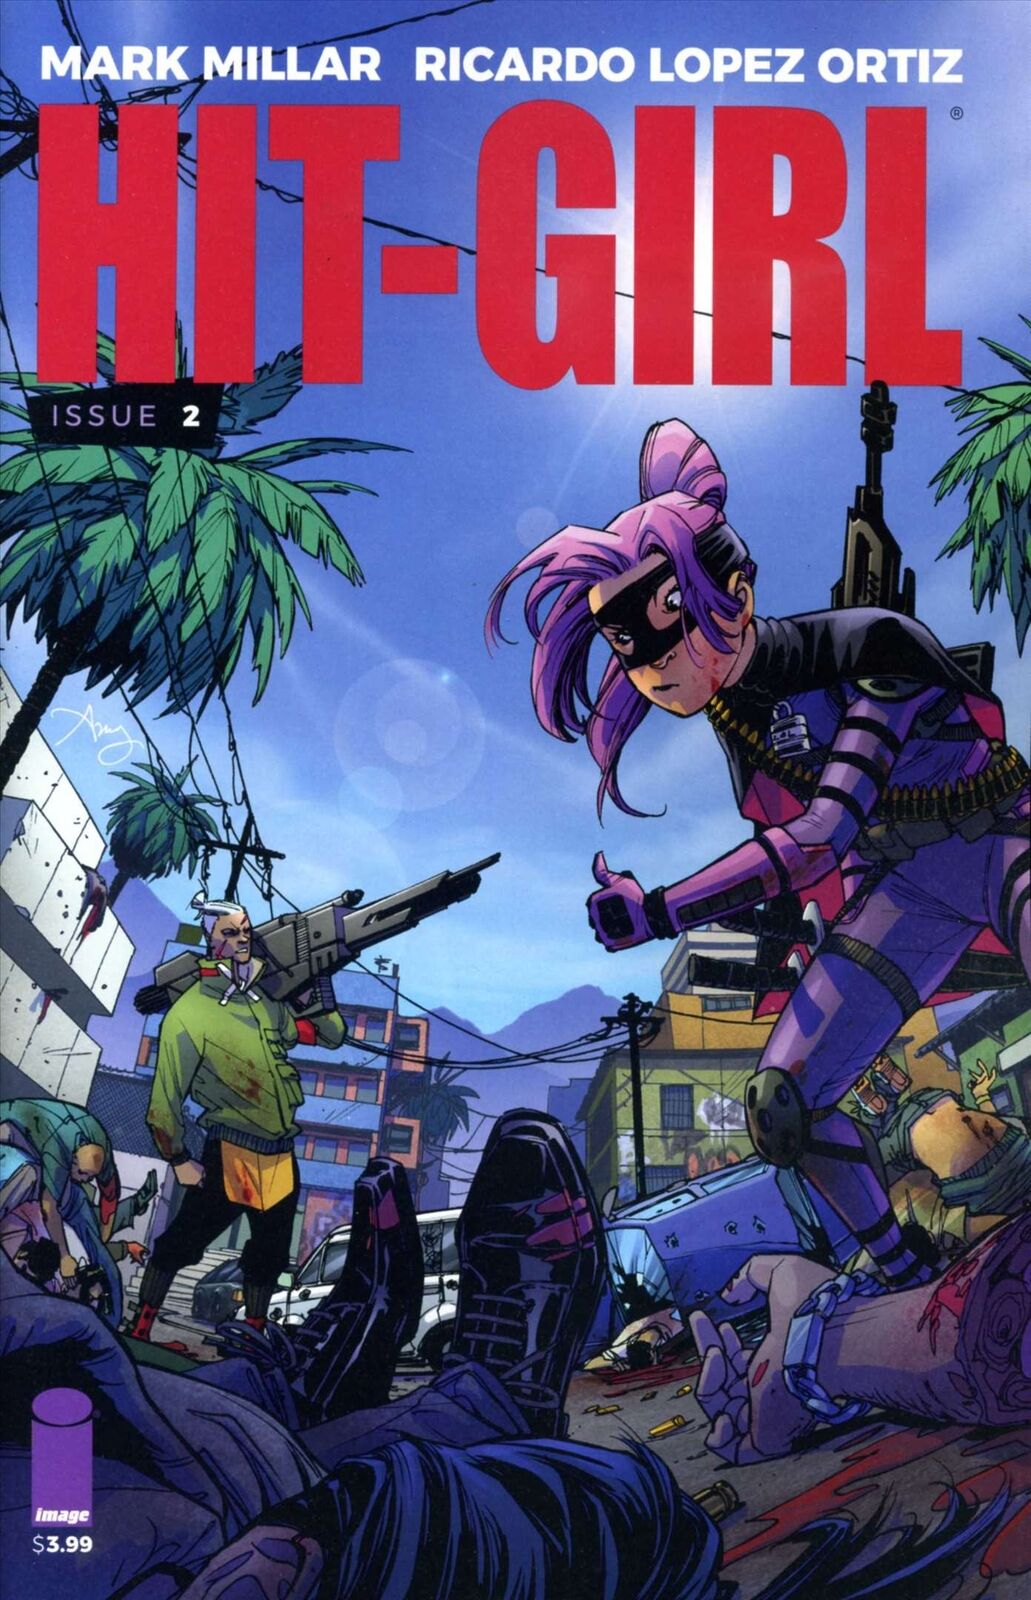 Hit-Girl (2nd Series) #2A VF/NM; Image | Mark Millar - we combine shipping